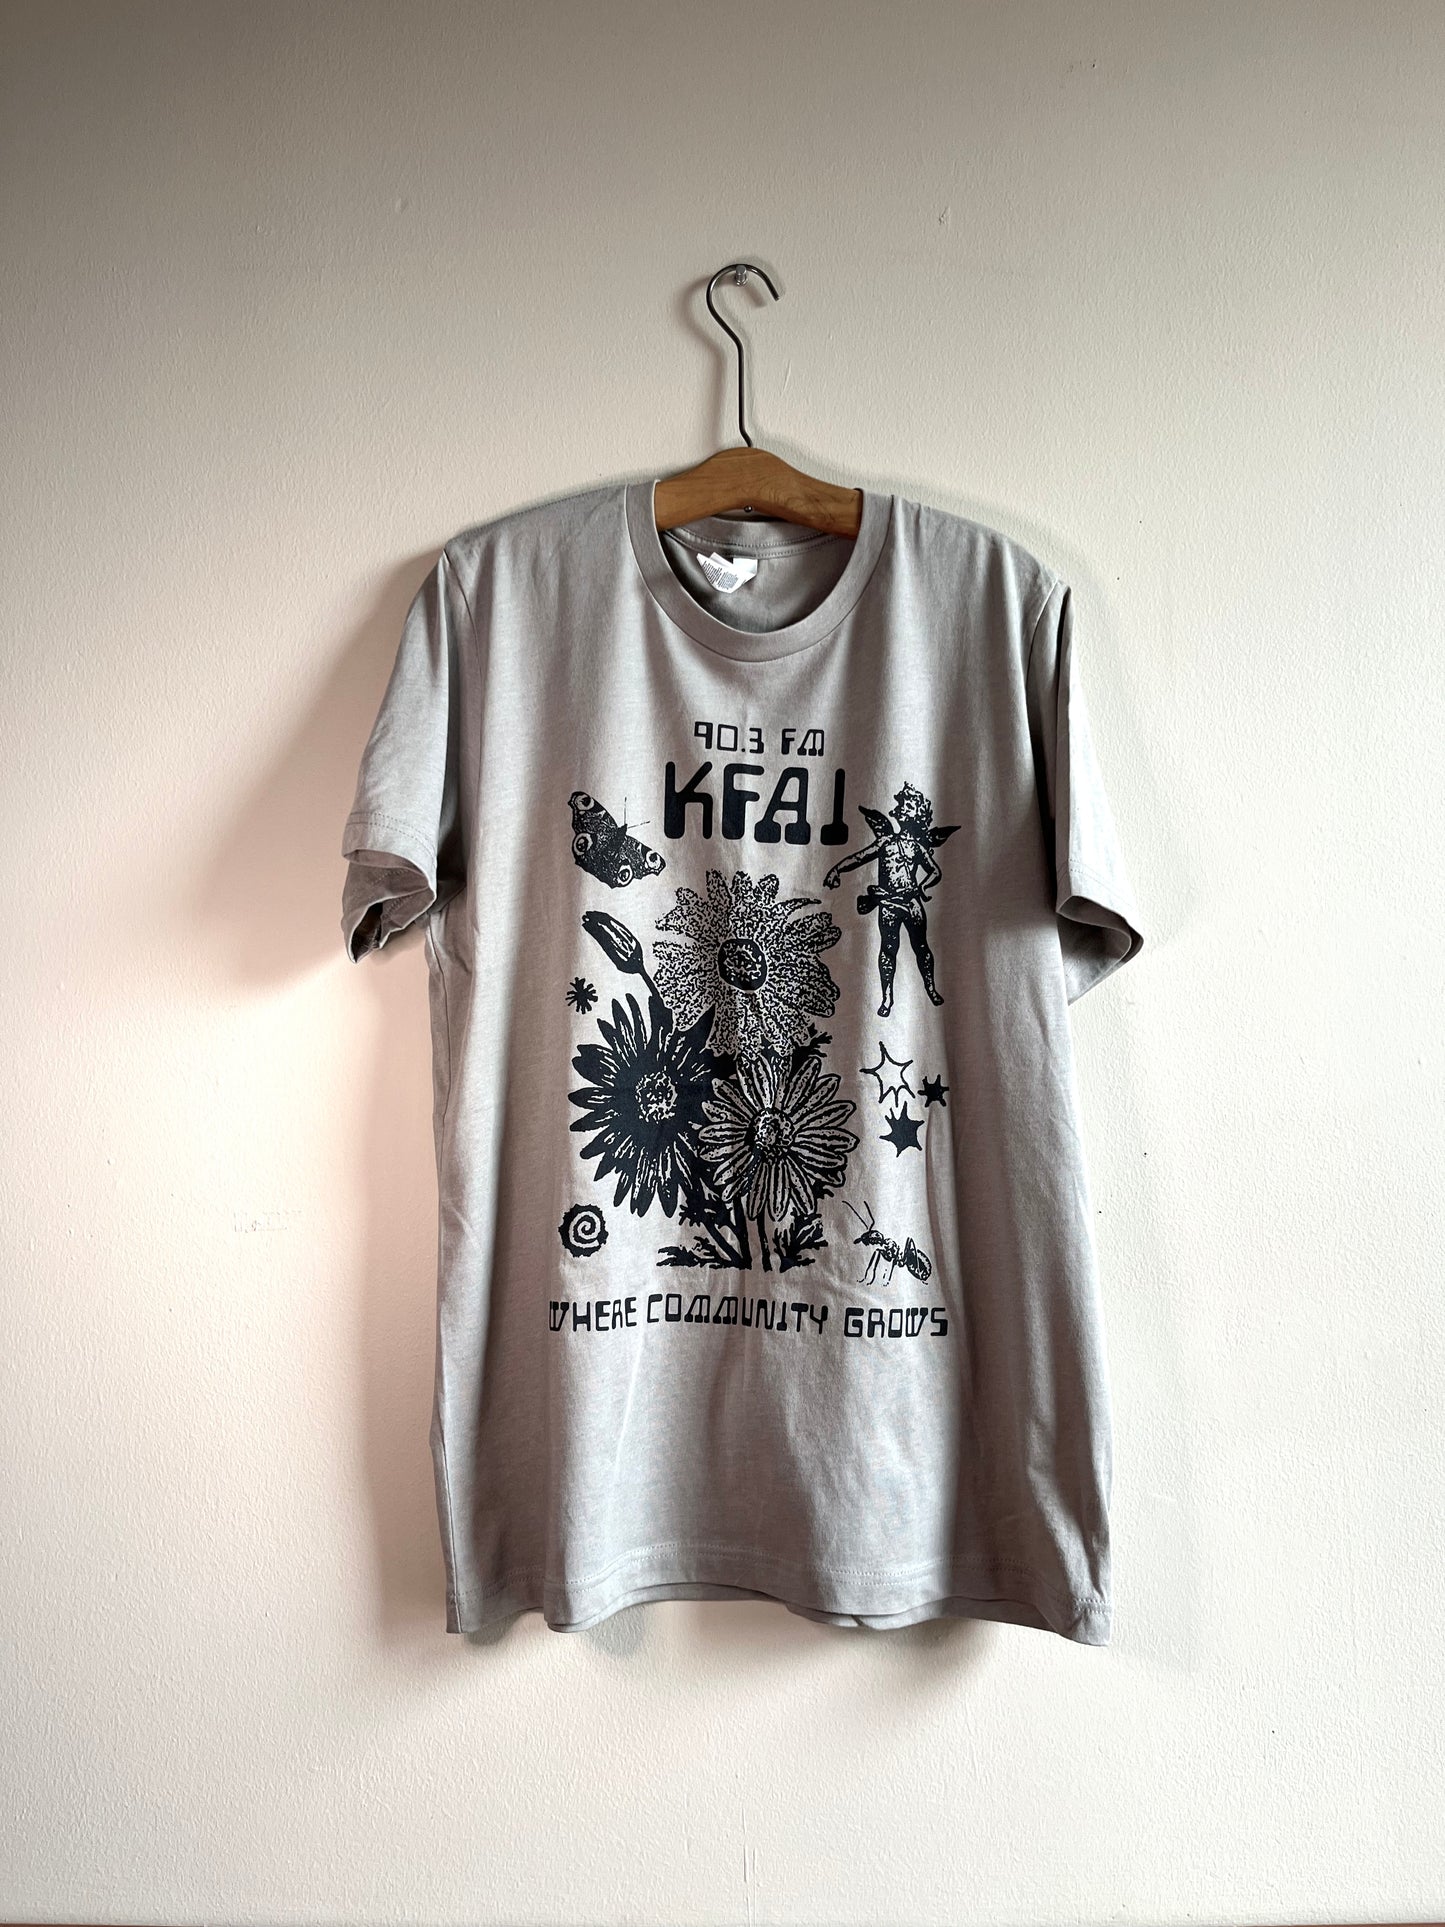 Beige shirt with black ink. The design is comprised of collage elements of flowers, angels, and insects. The text reads 90.3FM KFAI and Where Community Grows.